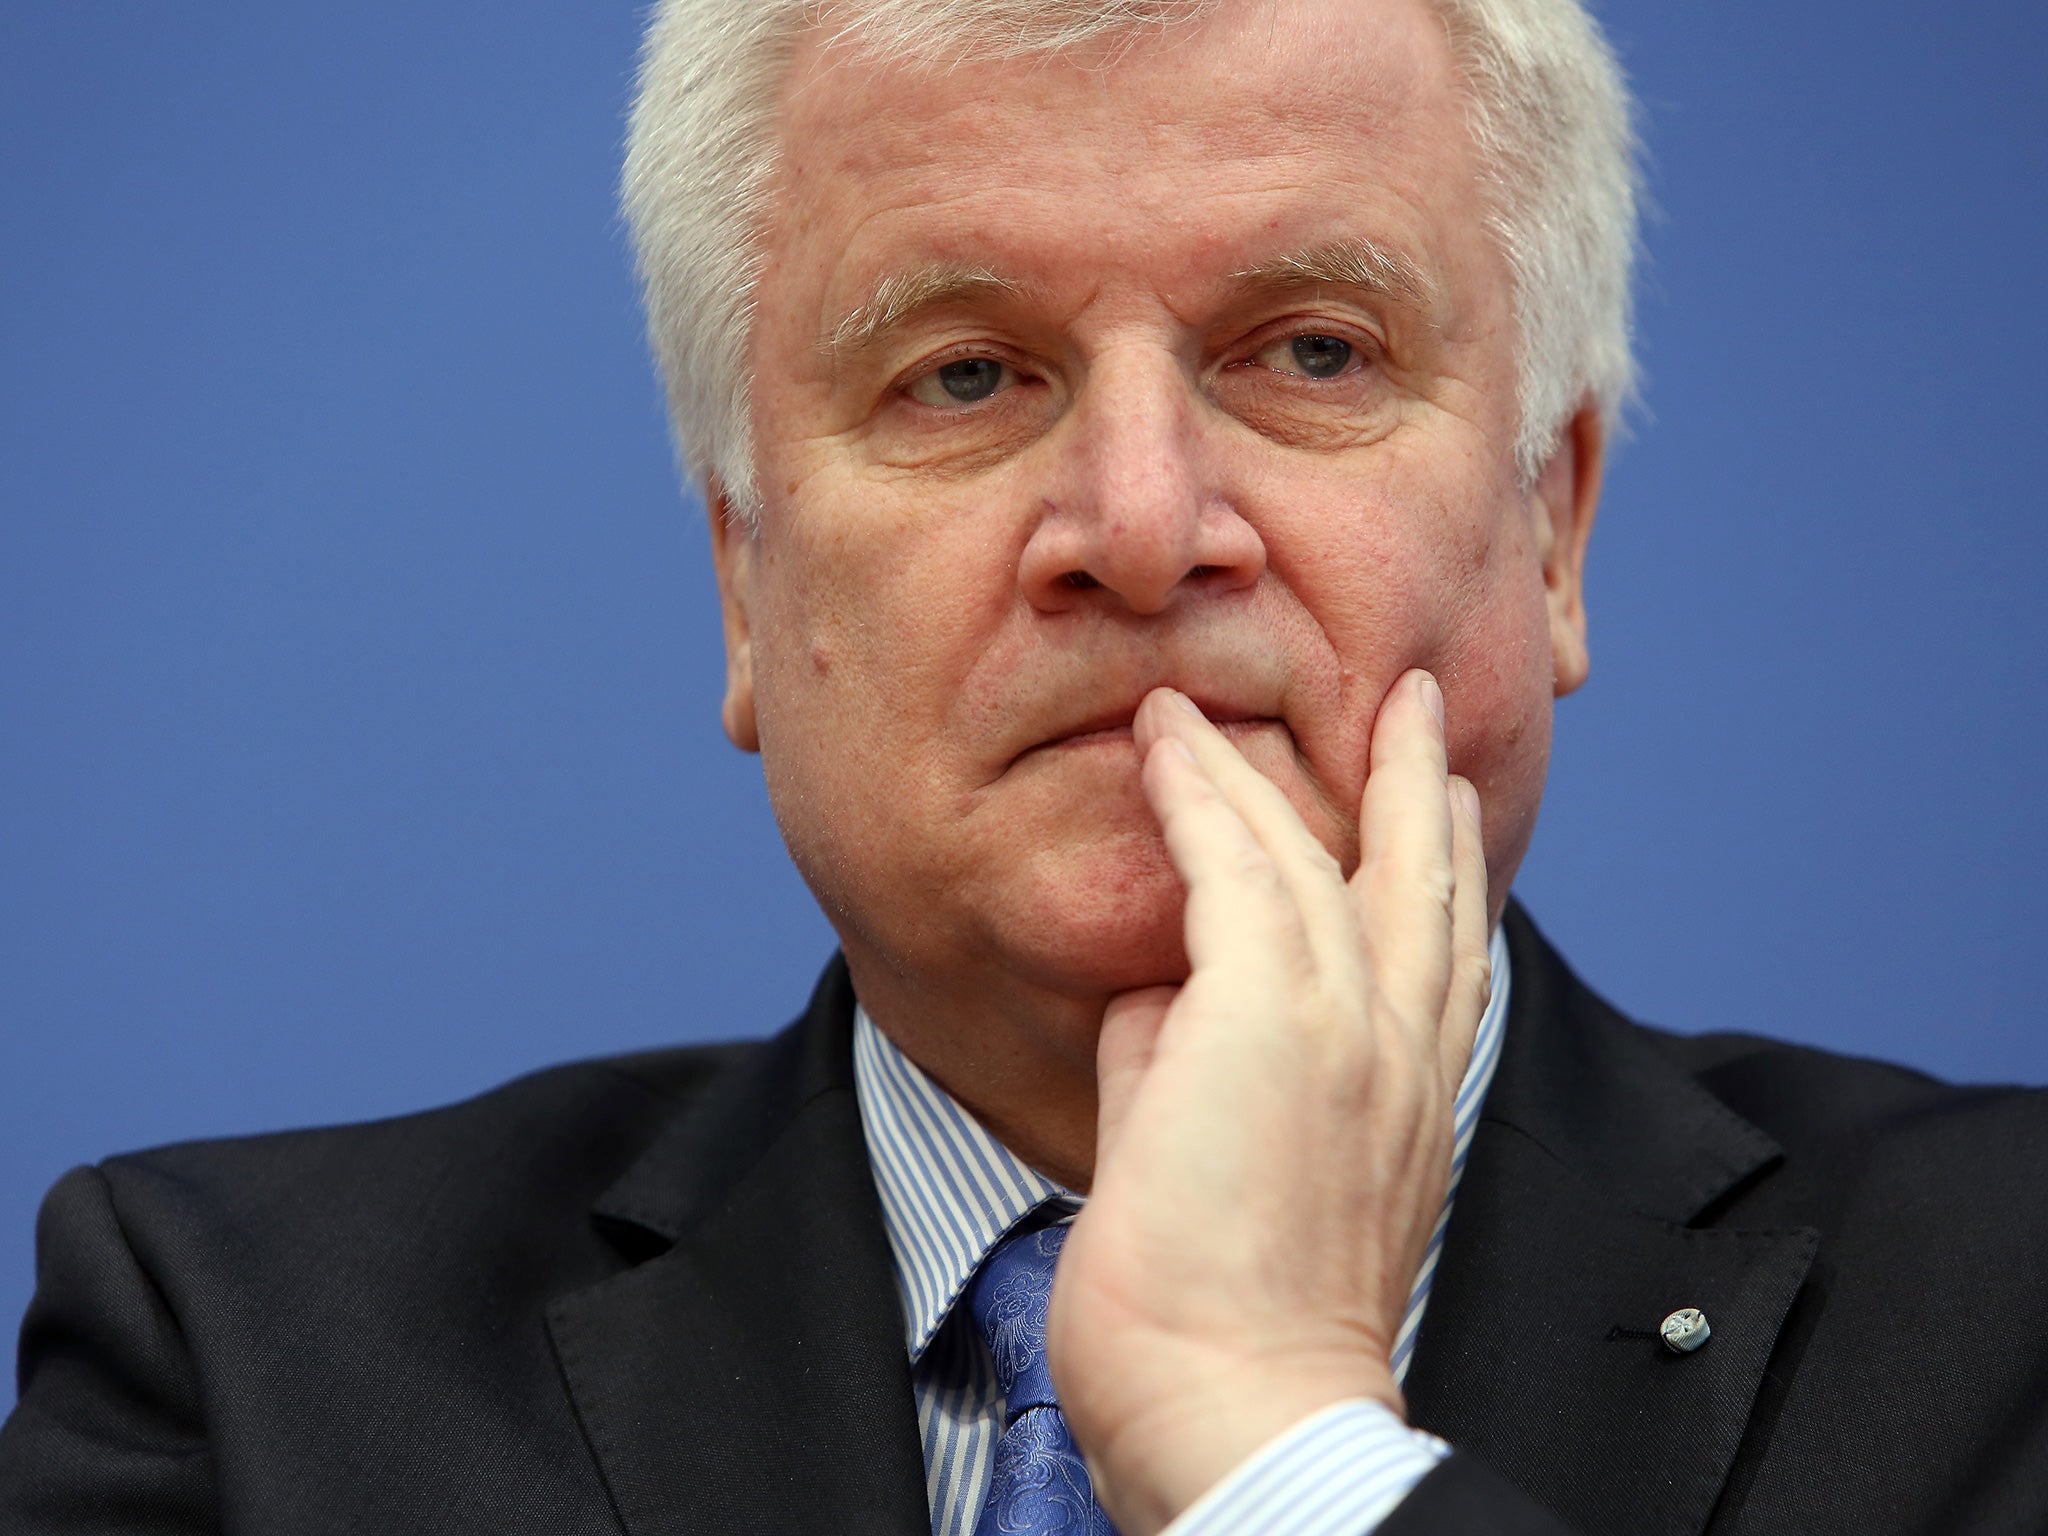 German interior minister Horst Seehofer said there is ‘no place’ in the country for a group like 'Wolf Brigade 44’